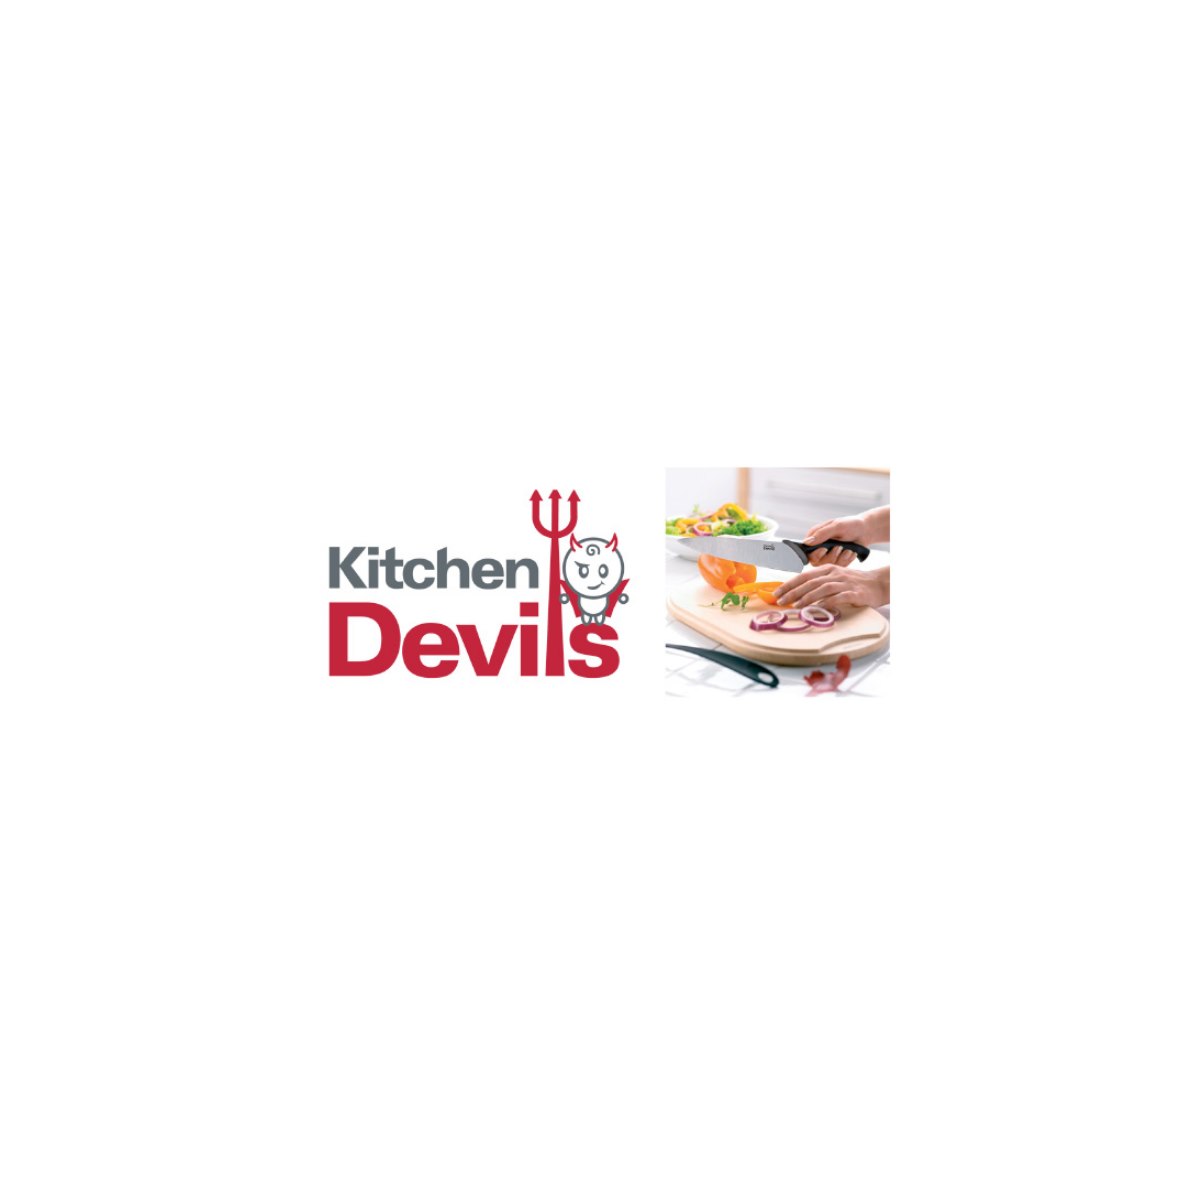 Where to Buy Kitchen Devils Products